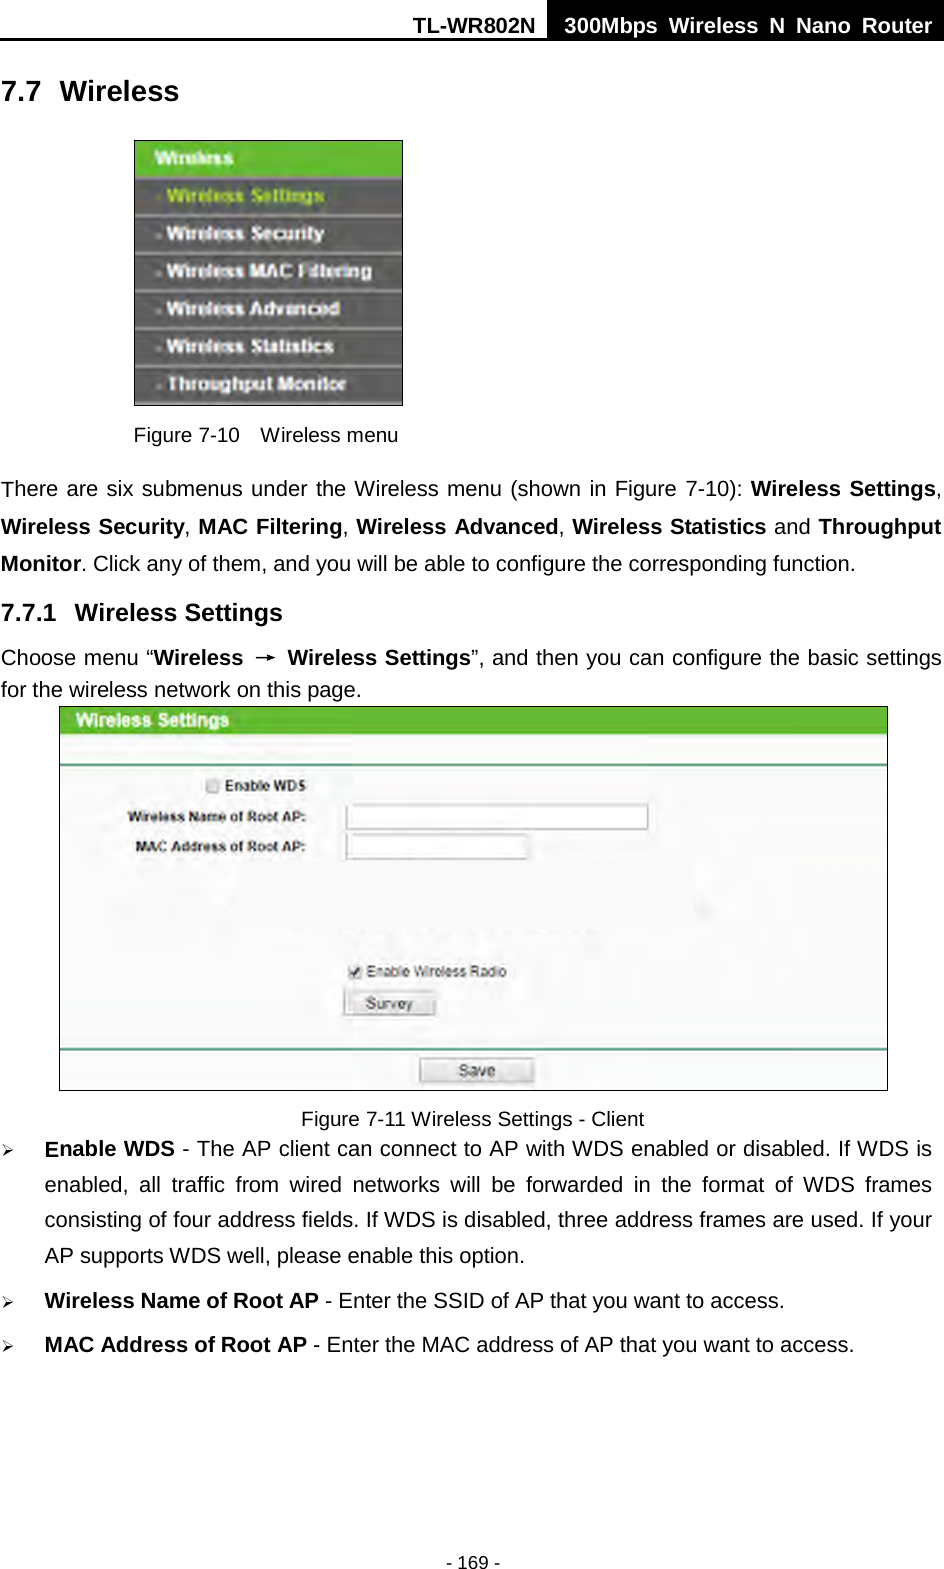 TL-WR802N  300Mbps Wireless N Nano Router  7.7 Wireless  Figure 7-10  Wireless menu There are six submenus under the Wireless menu (shown in Figure 7-10): Wireless Settings, Wireless Security, MAC Filtering, Wireless Advanced, Wireless Statistics and Throughput Monitor. Click any of them, and you will be able to configure the corresponding function.   7.7.1 Wireless Settings Choose menu “Wireless  → Wireless Settings”, and then you can configure the basic settings for the wireless network on this page.  Figure 7-11 Wireless Settings - Client  Enable WDS - The AP client can connect to AP with WDS enabled or disabled. If WDS is enabled, all traffic from wired networks will be forwarded in the format of WDS frames consisting of four address fields. If WDS is disabled, three address frames are used. If your AP supports WDS well, please enable this option.  Wireless Name of Root AP - Enter the SSID of AP that you want to access.  MAC Address of Root AP - Enter the MAC address of AP that you want to access. - 169 - 